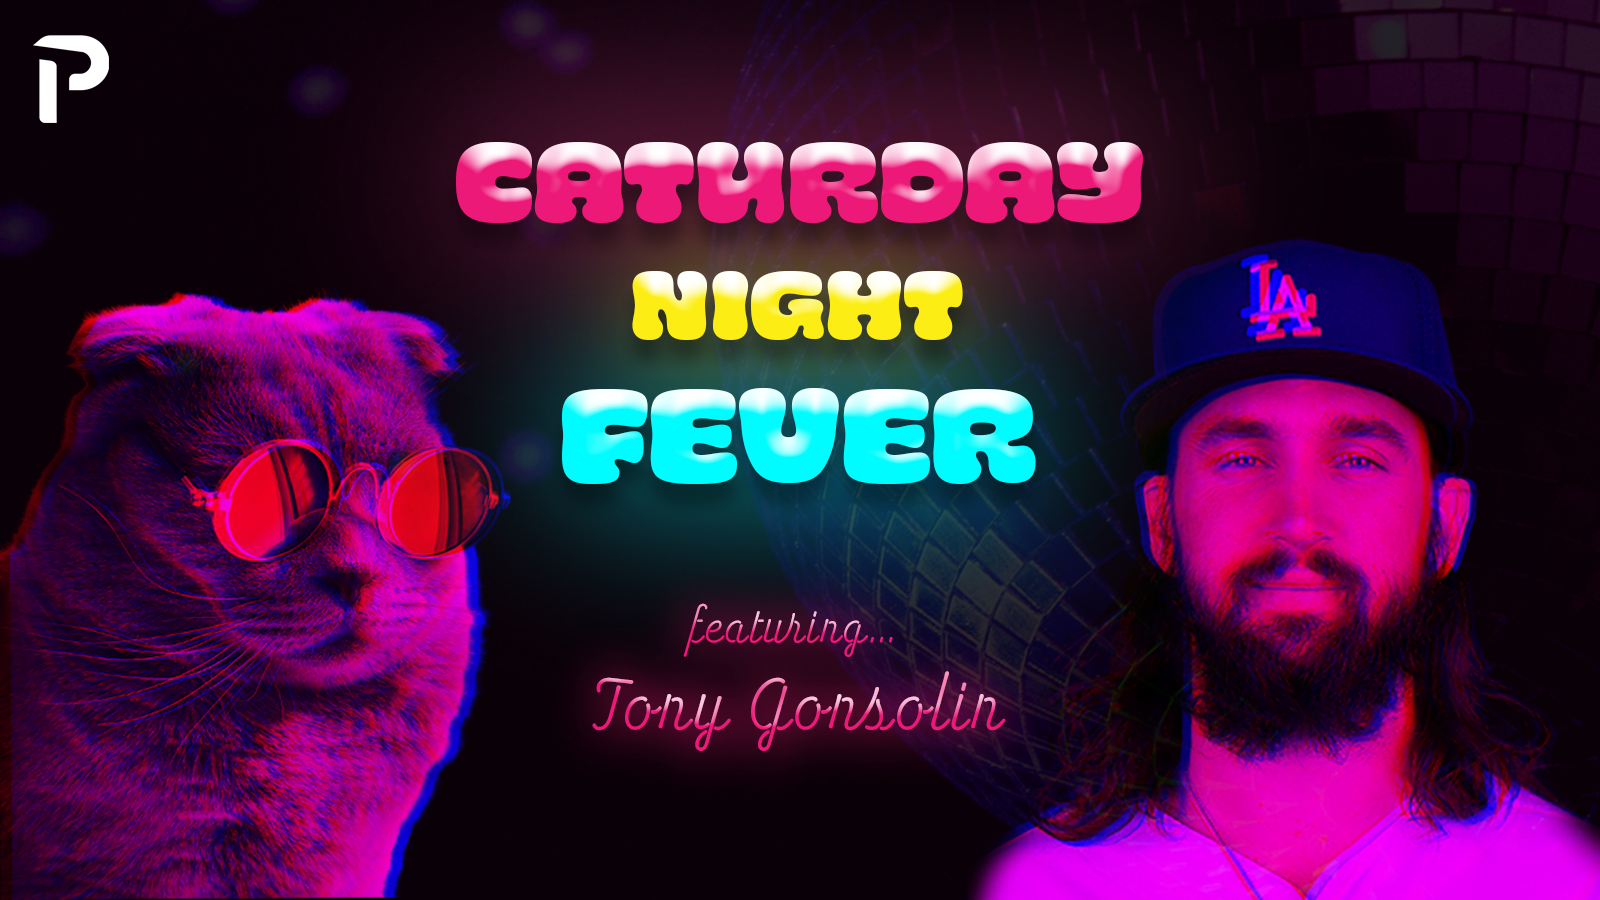 Caturday Night Fever: Tony Gonsolin Emerges as a Star